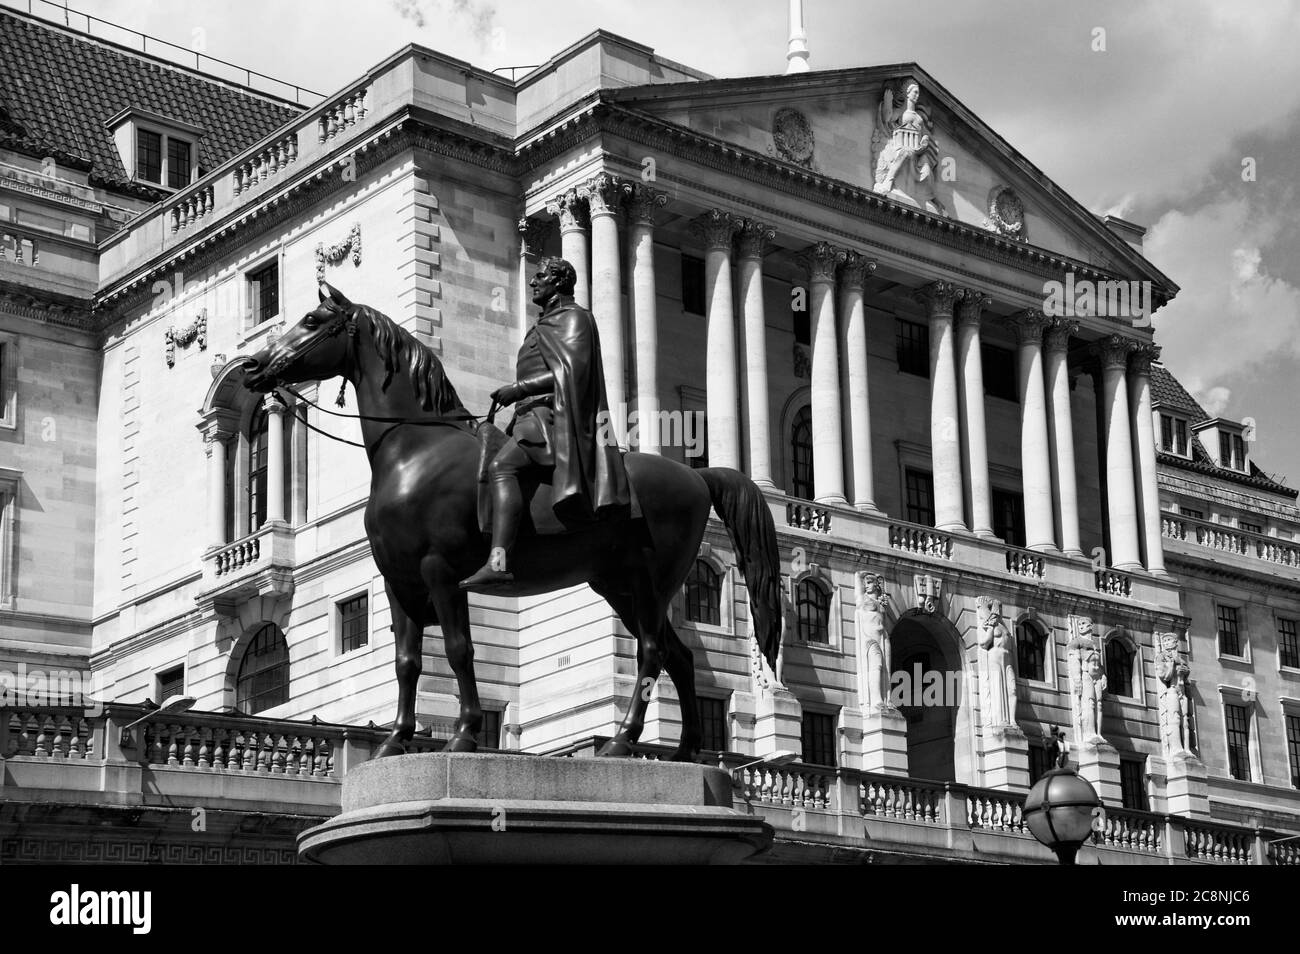 The Bank of England fondly known as The Old Lady Of Threadneadle Street London England UK with an equestrian statue of the Duke of Wellington in the f Stock Photo